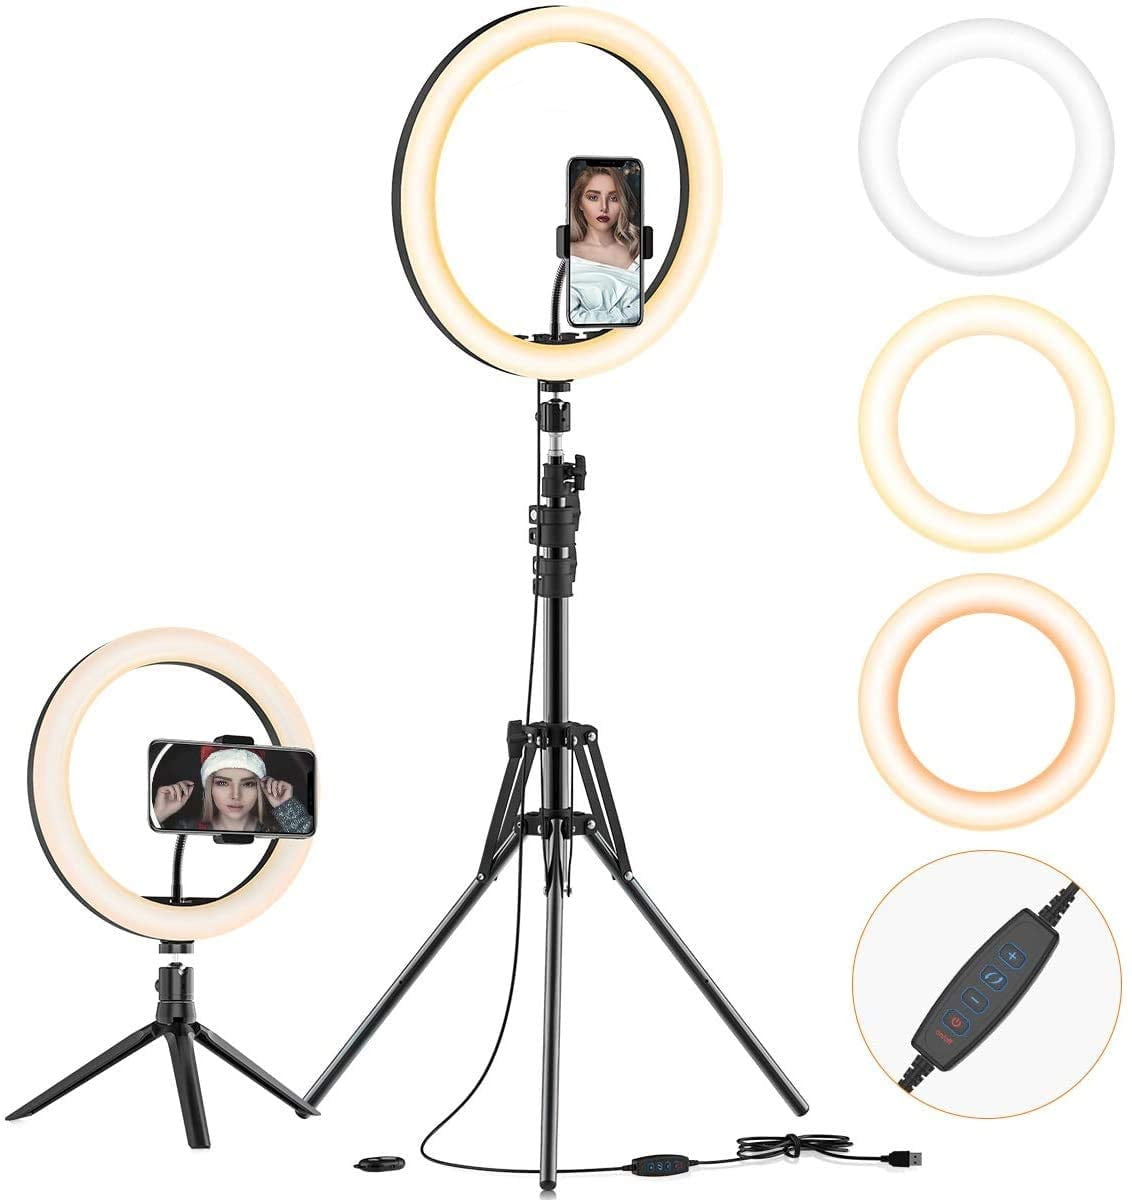 NeeXiu Ring Light 5.7 with Tripod Stand for YouTube Video and Selfie/Makeup Flash Light with Cell Phone Holder Lamp 3 Light Modes & 11 Brightness Level 